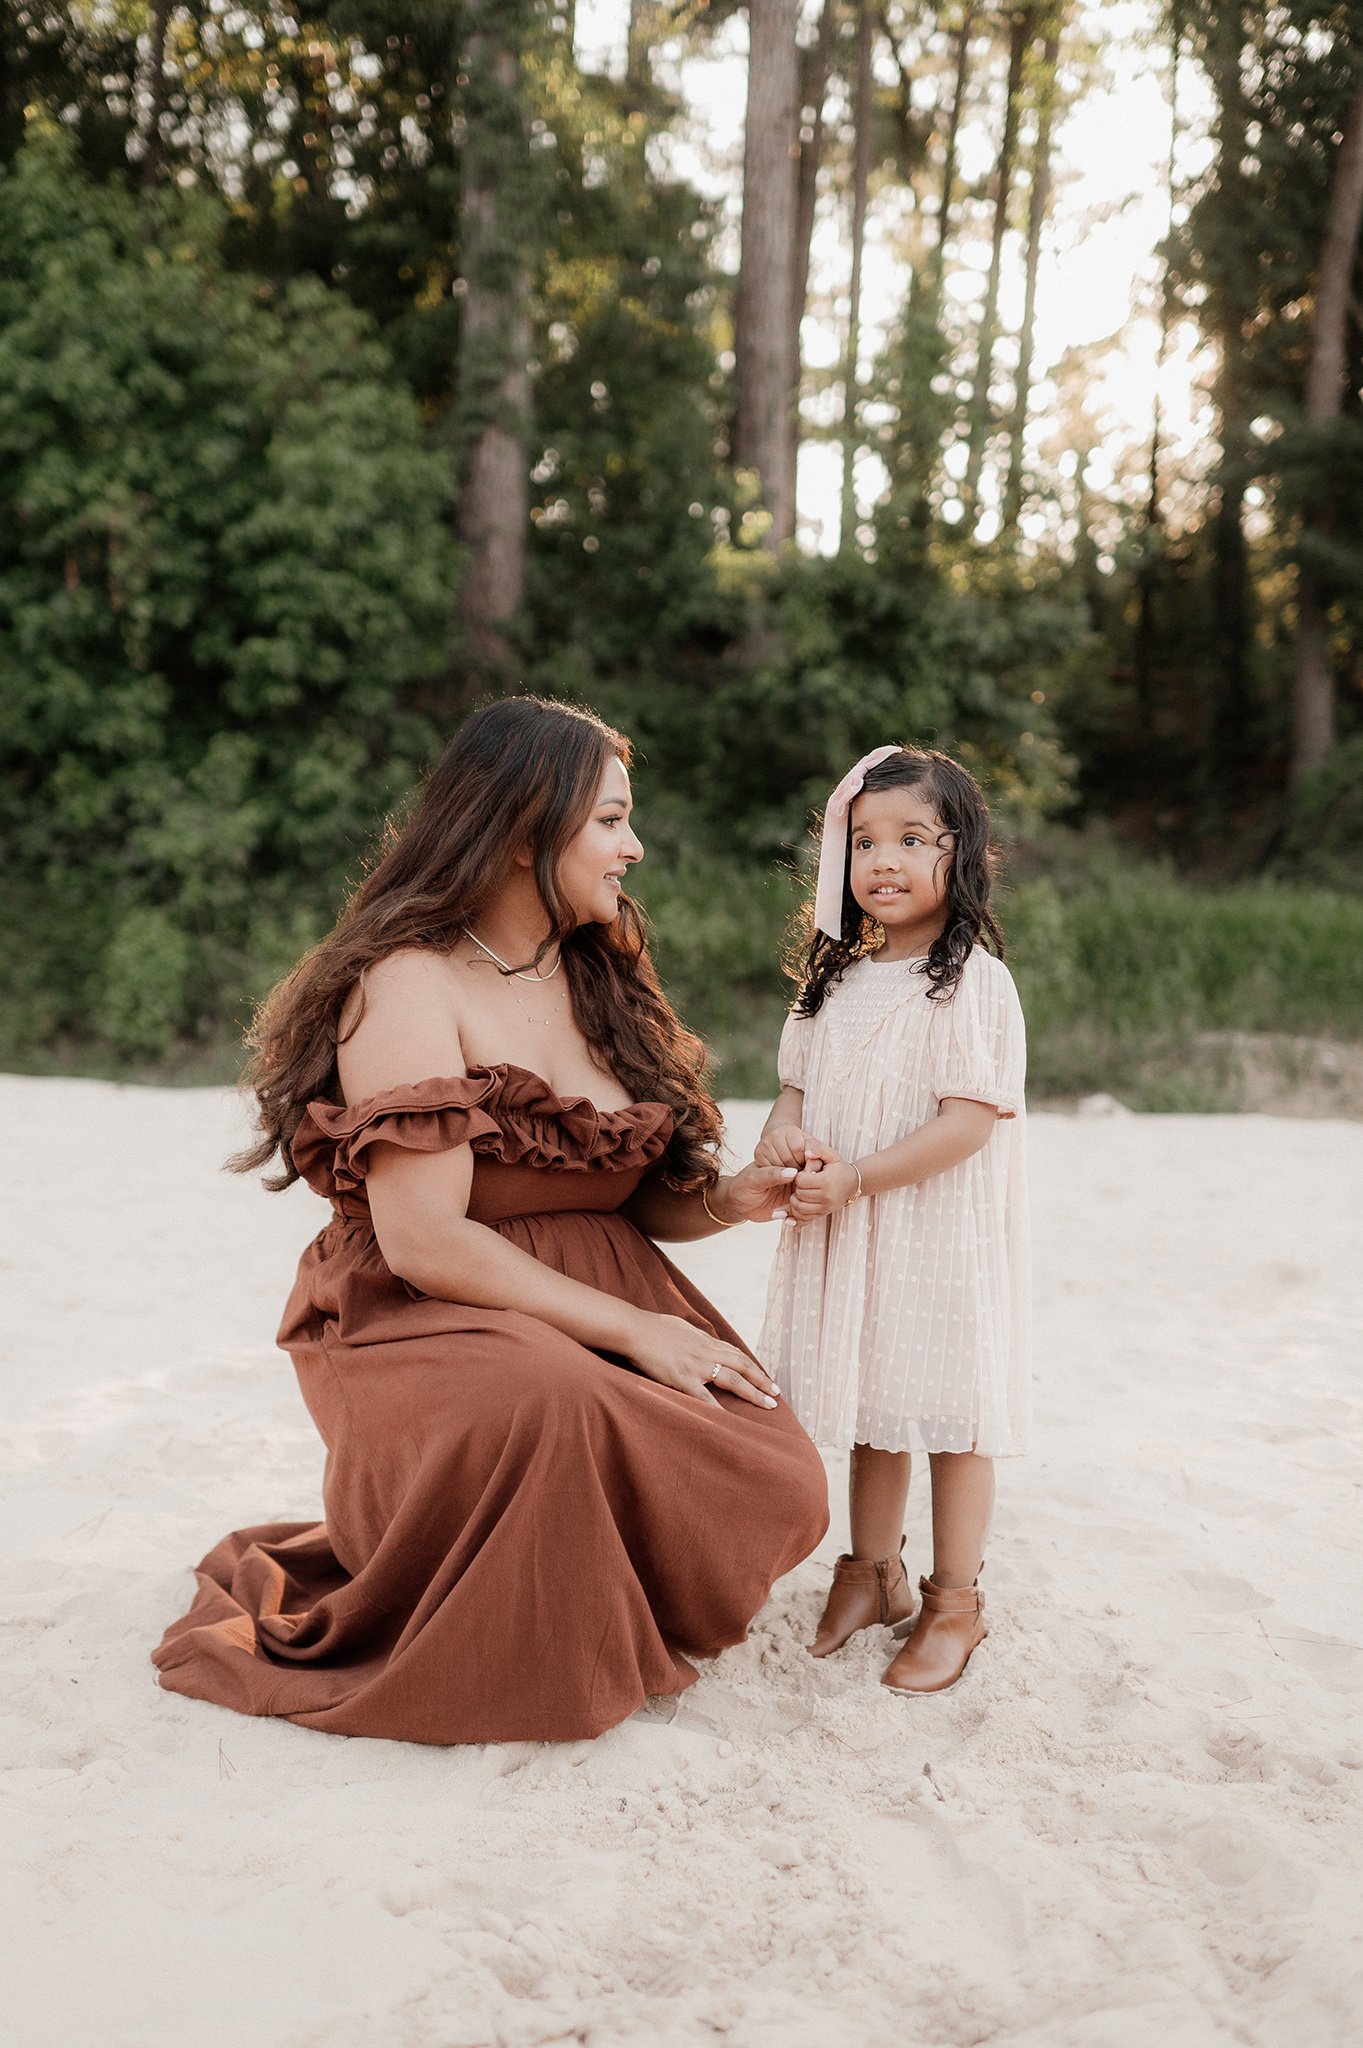 the woodlands family photographer _ conroe photographer _ houston family photographer _ ashley gillen photography _ texas family photographer _ conroe wedding photographer _ conroe texas _ cshi34.jpg